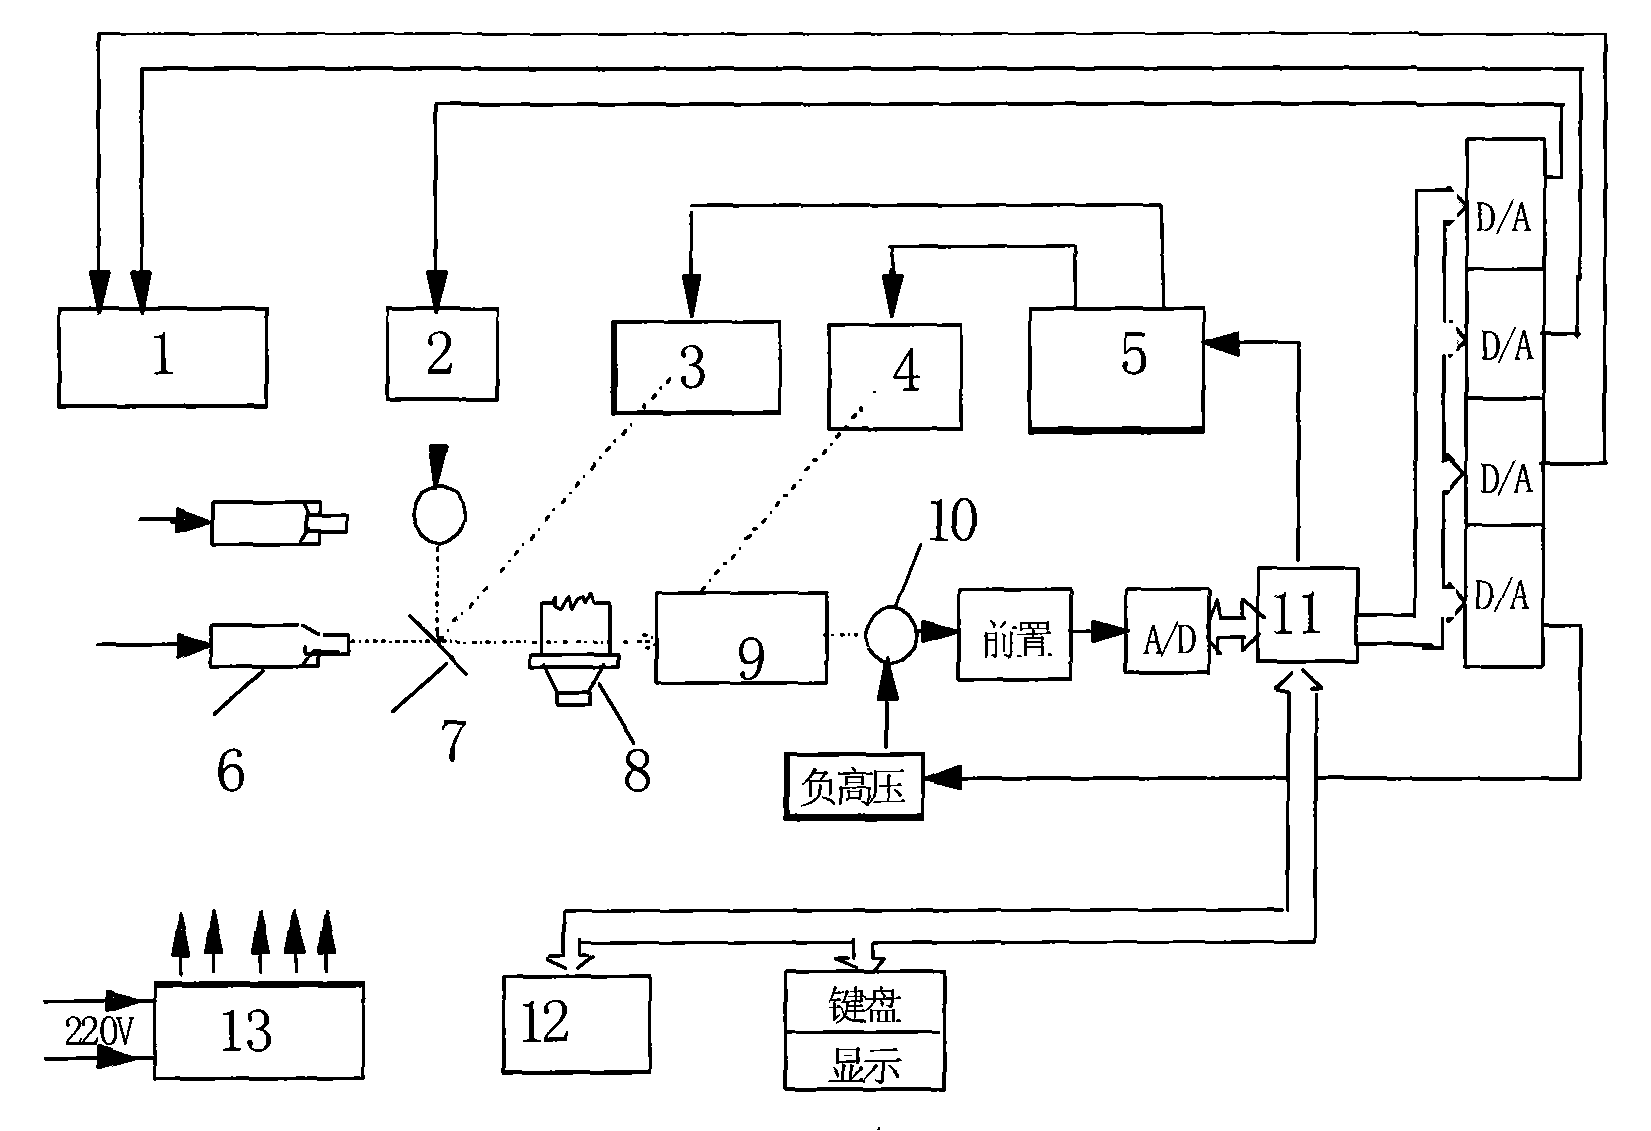 Deuterium lamp power control circuit used for atomic absorption spectrophotometer